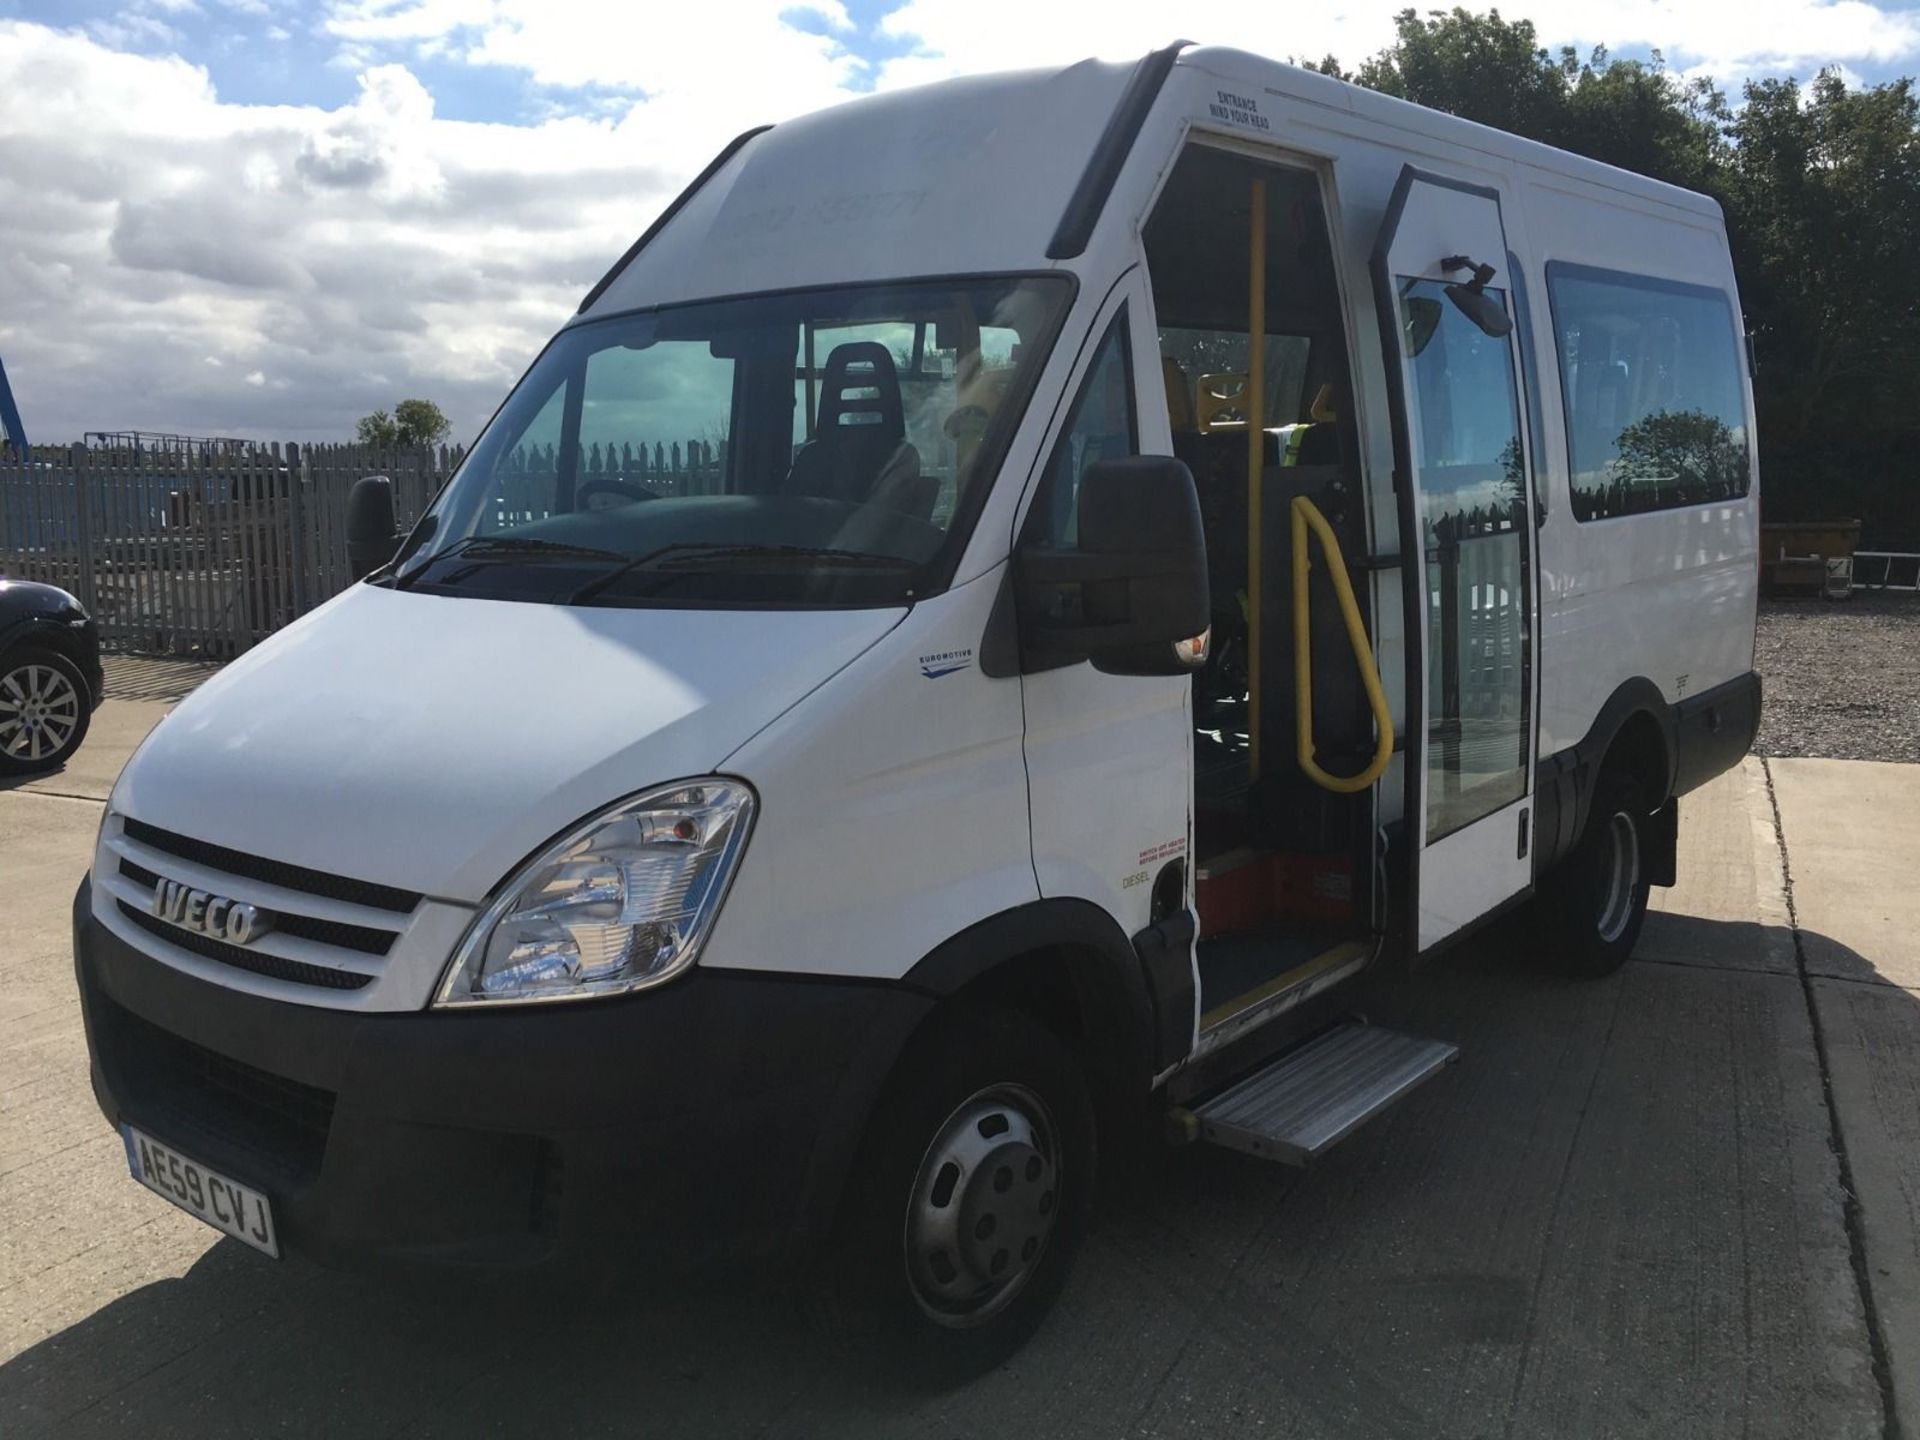 09 59 REG IVECO DAILY 45C15 DISABLED ACCESS MINIBUS WITH POWER DOOR - 3.0 TURBO DIESEL AUTOMATIC